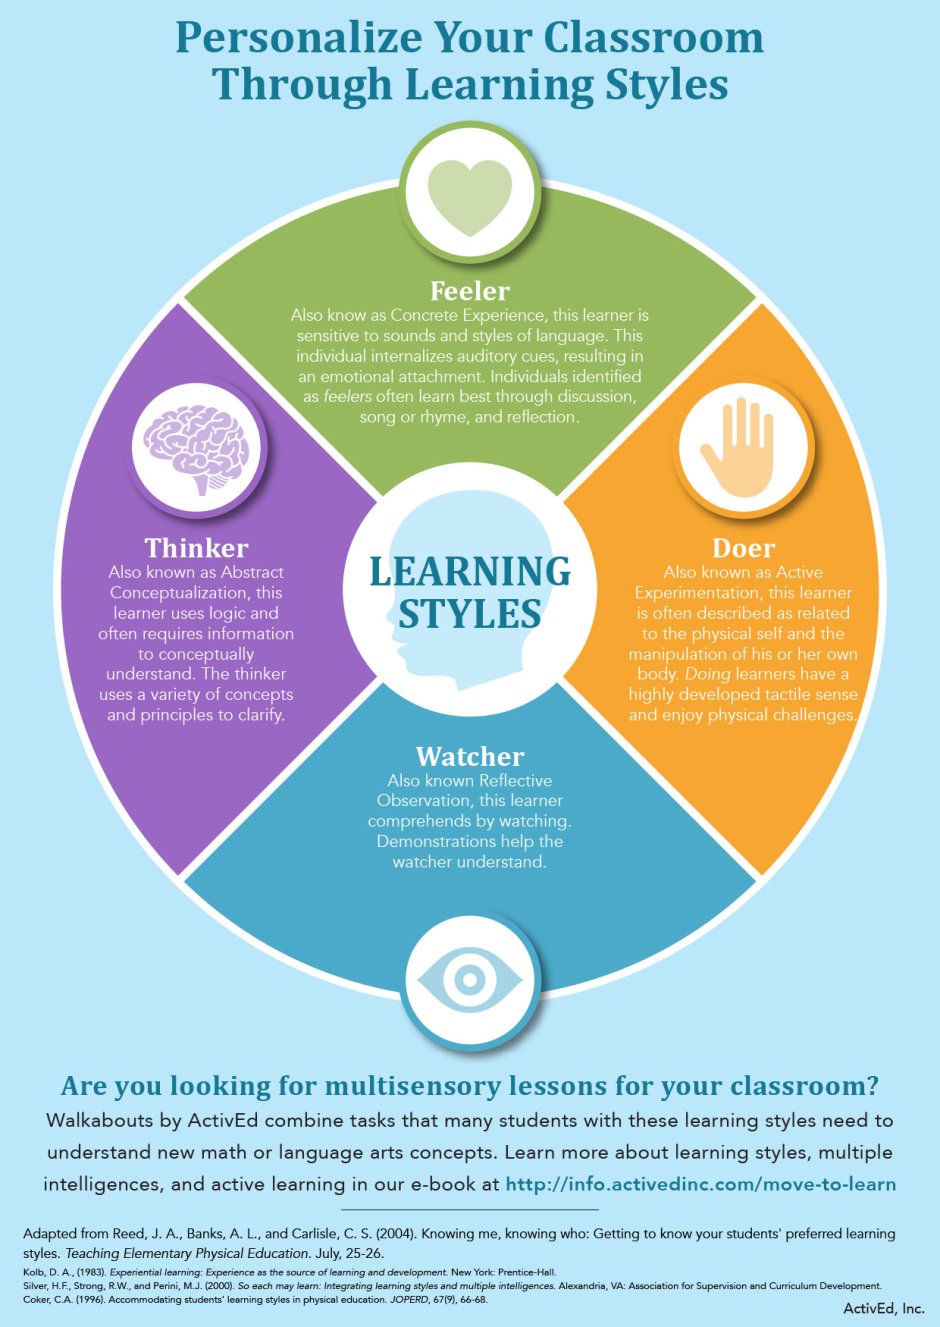 The types of learning styles